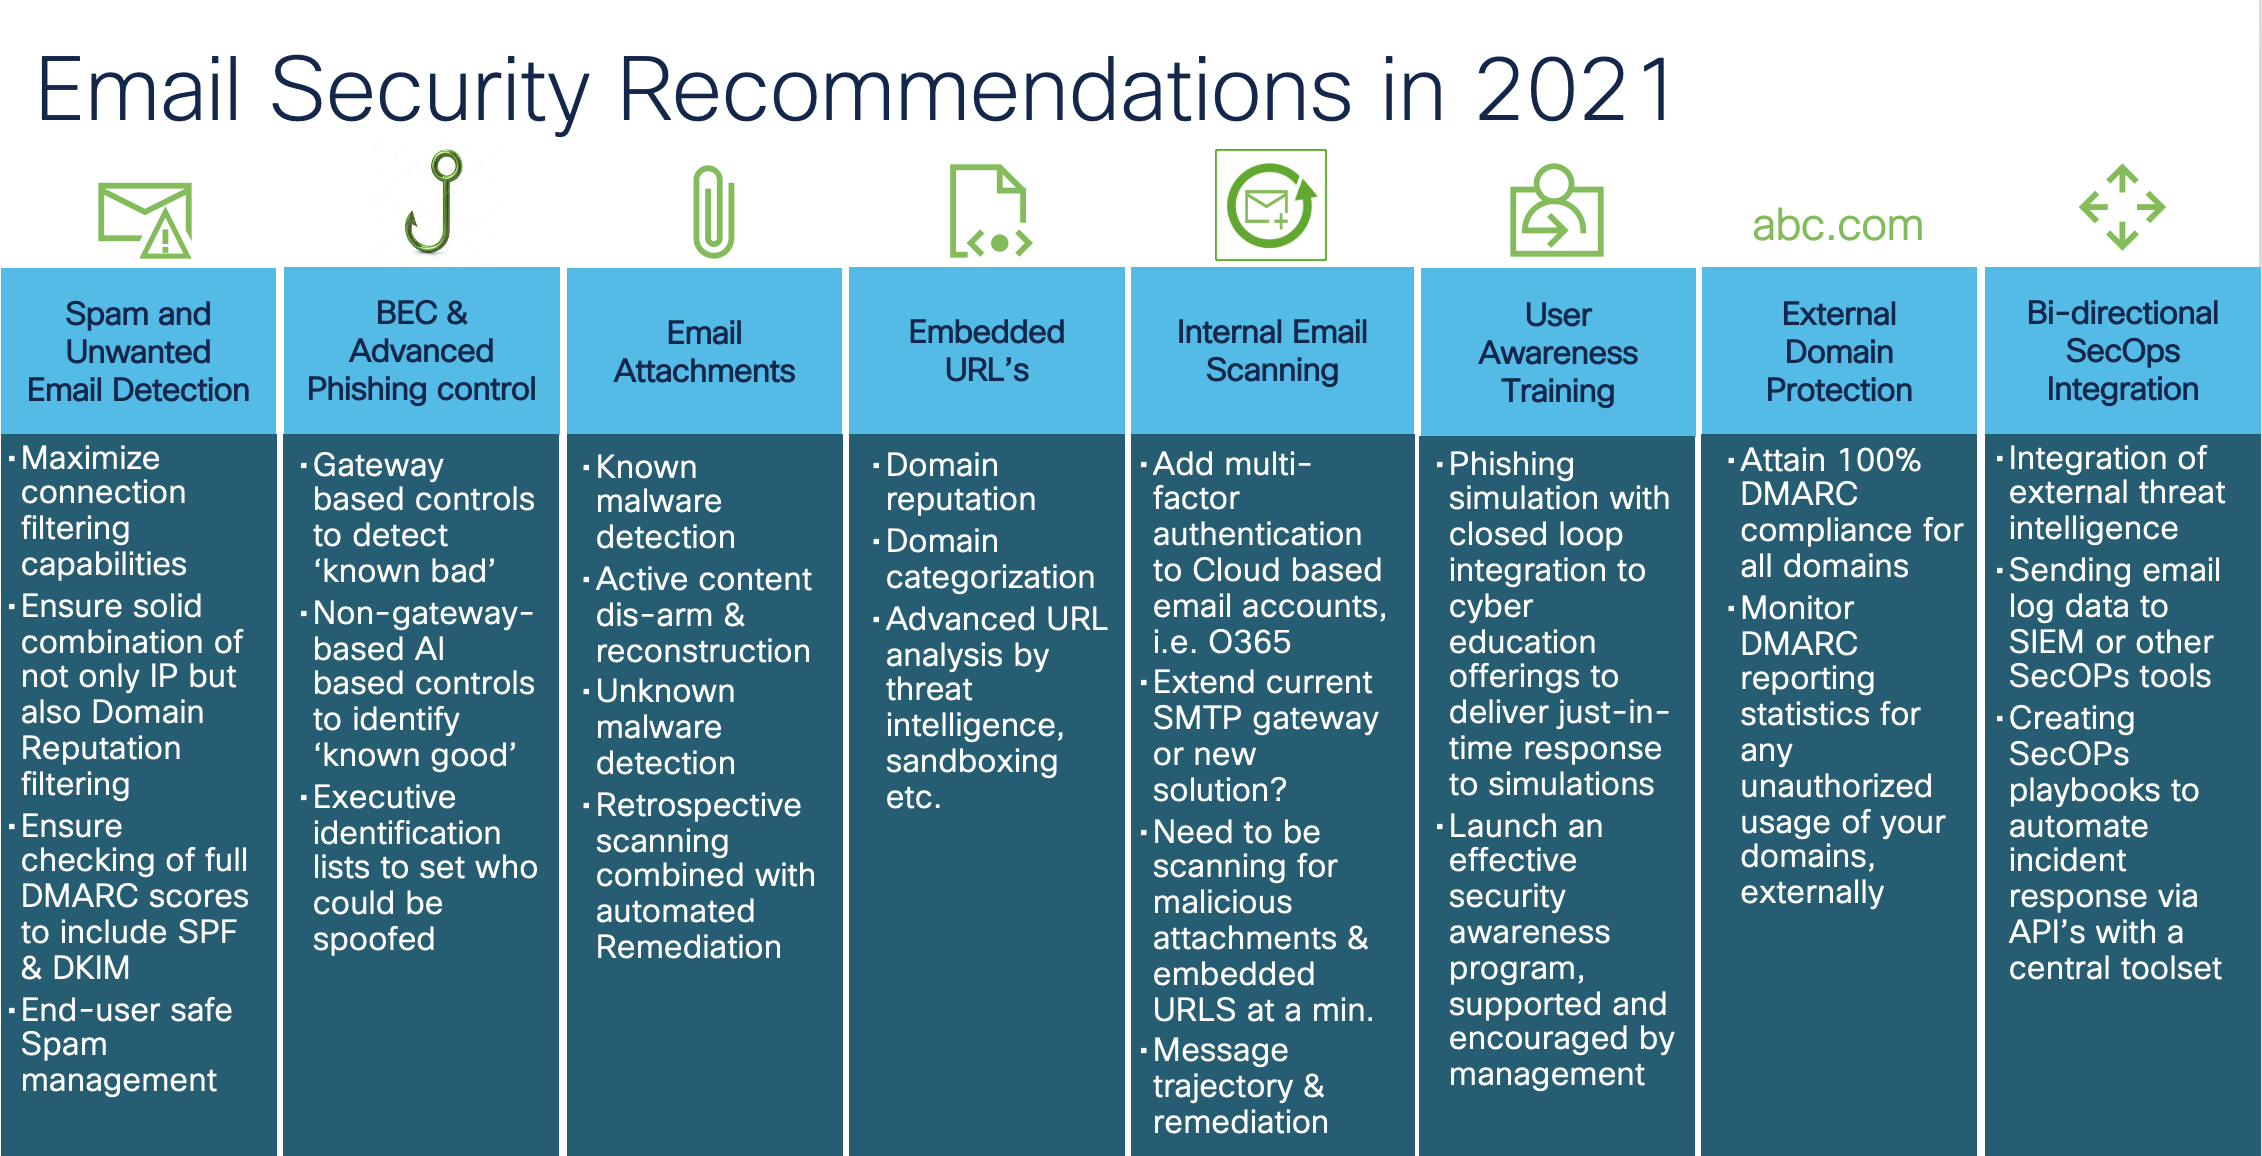 Email Security Recommendations YOU SHOULD LOOK AT from 2021